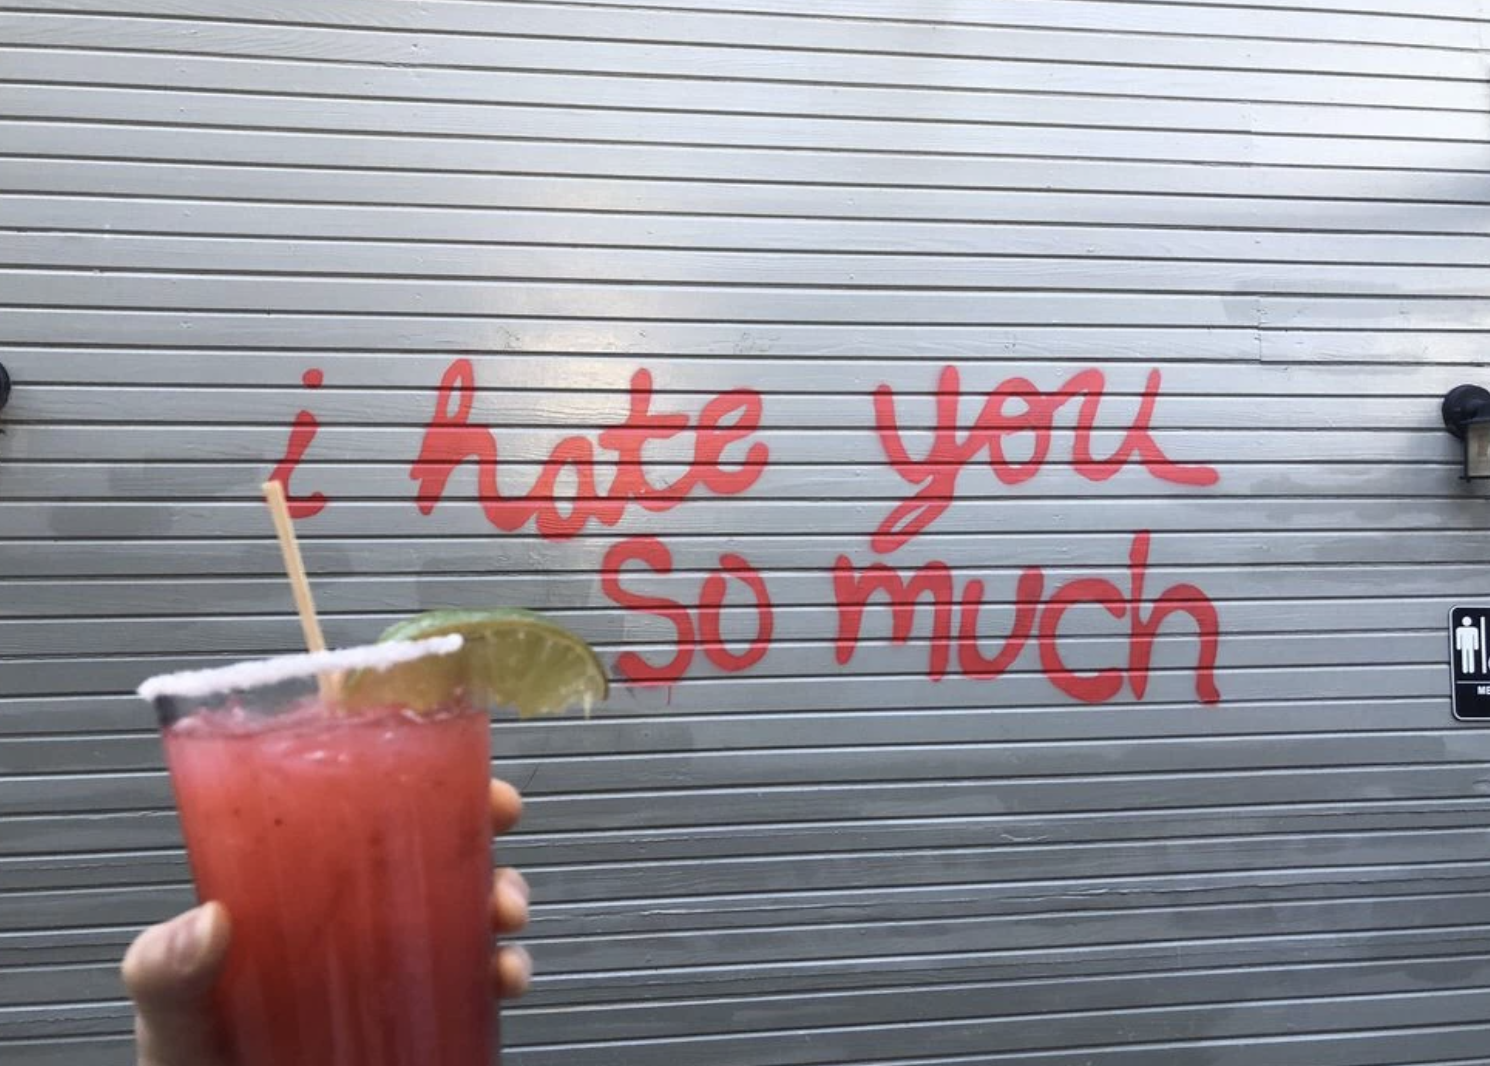 The "I hate you so much" mural, courtesy of Bungalow's website. 